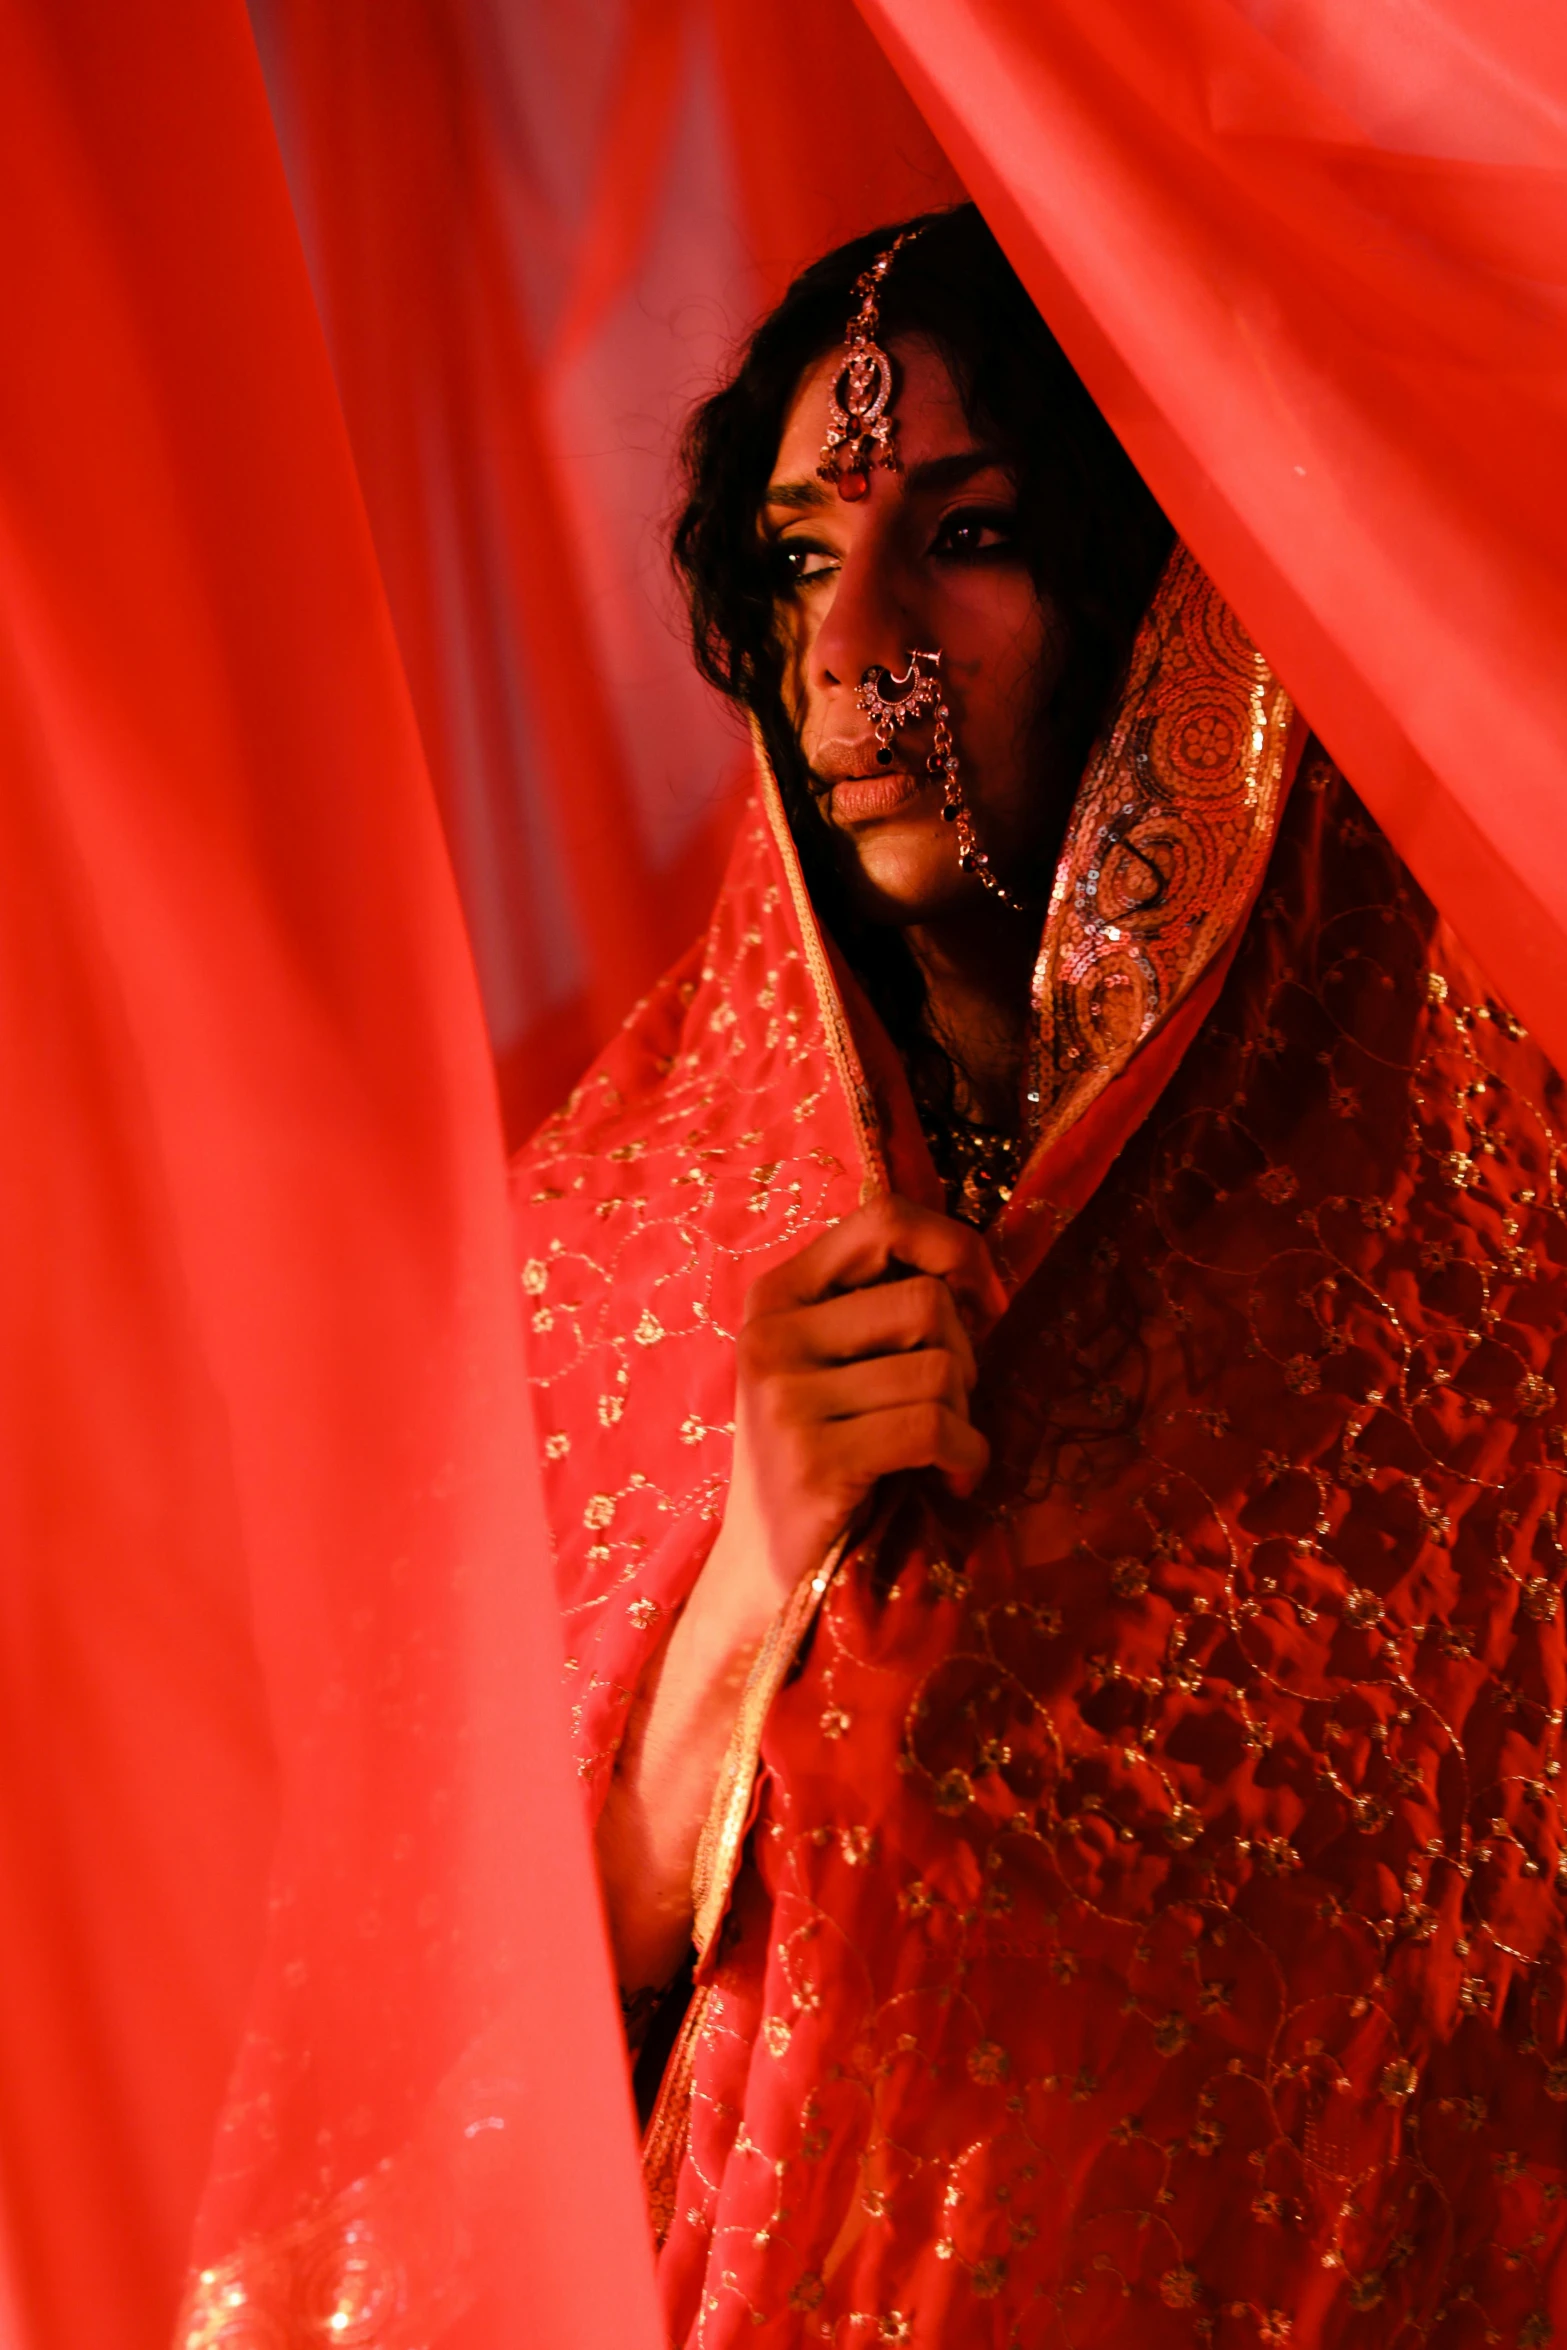 a woman is hiding behind a red curtain, an album cover, flickr, transgressive art, dressed in a sari, holy ceremony, pride, photographed for reuters